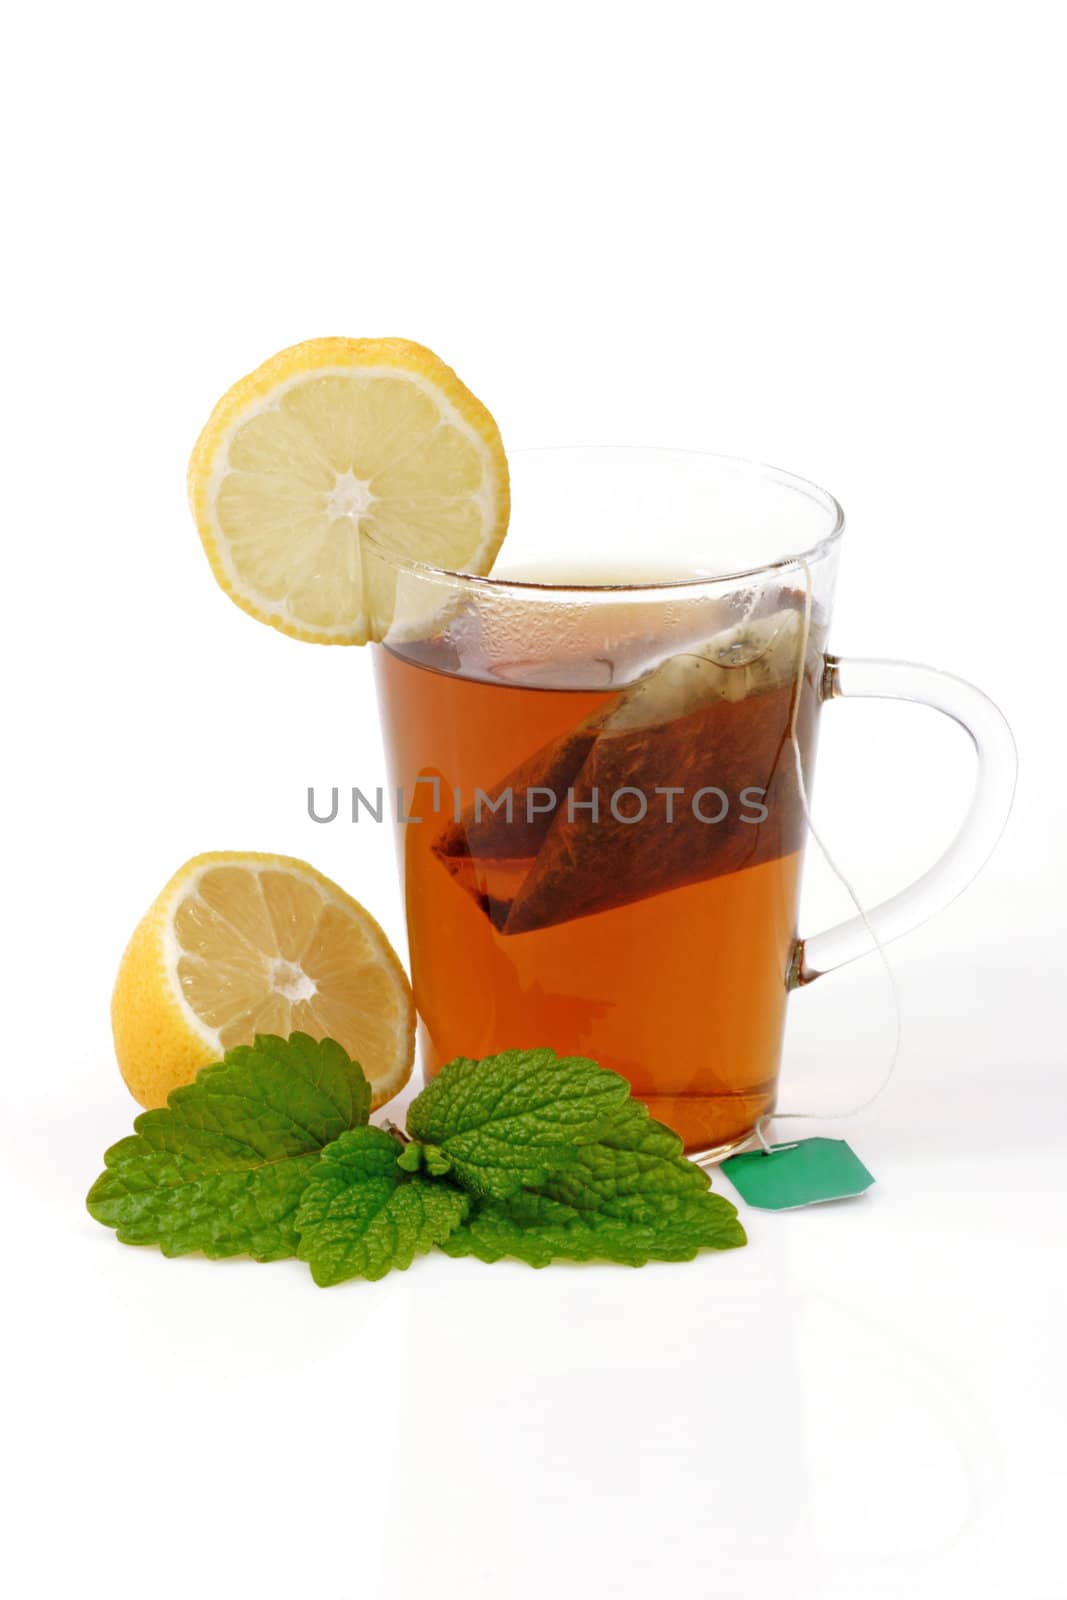 Peppermint tea in a glass on bright background